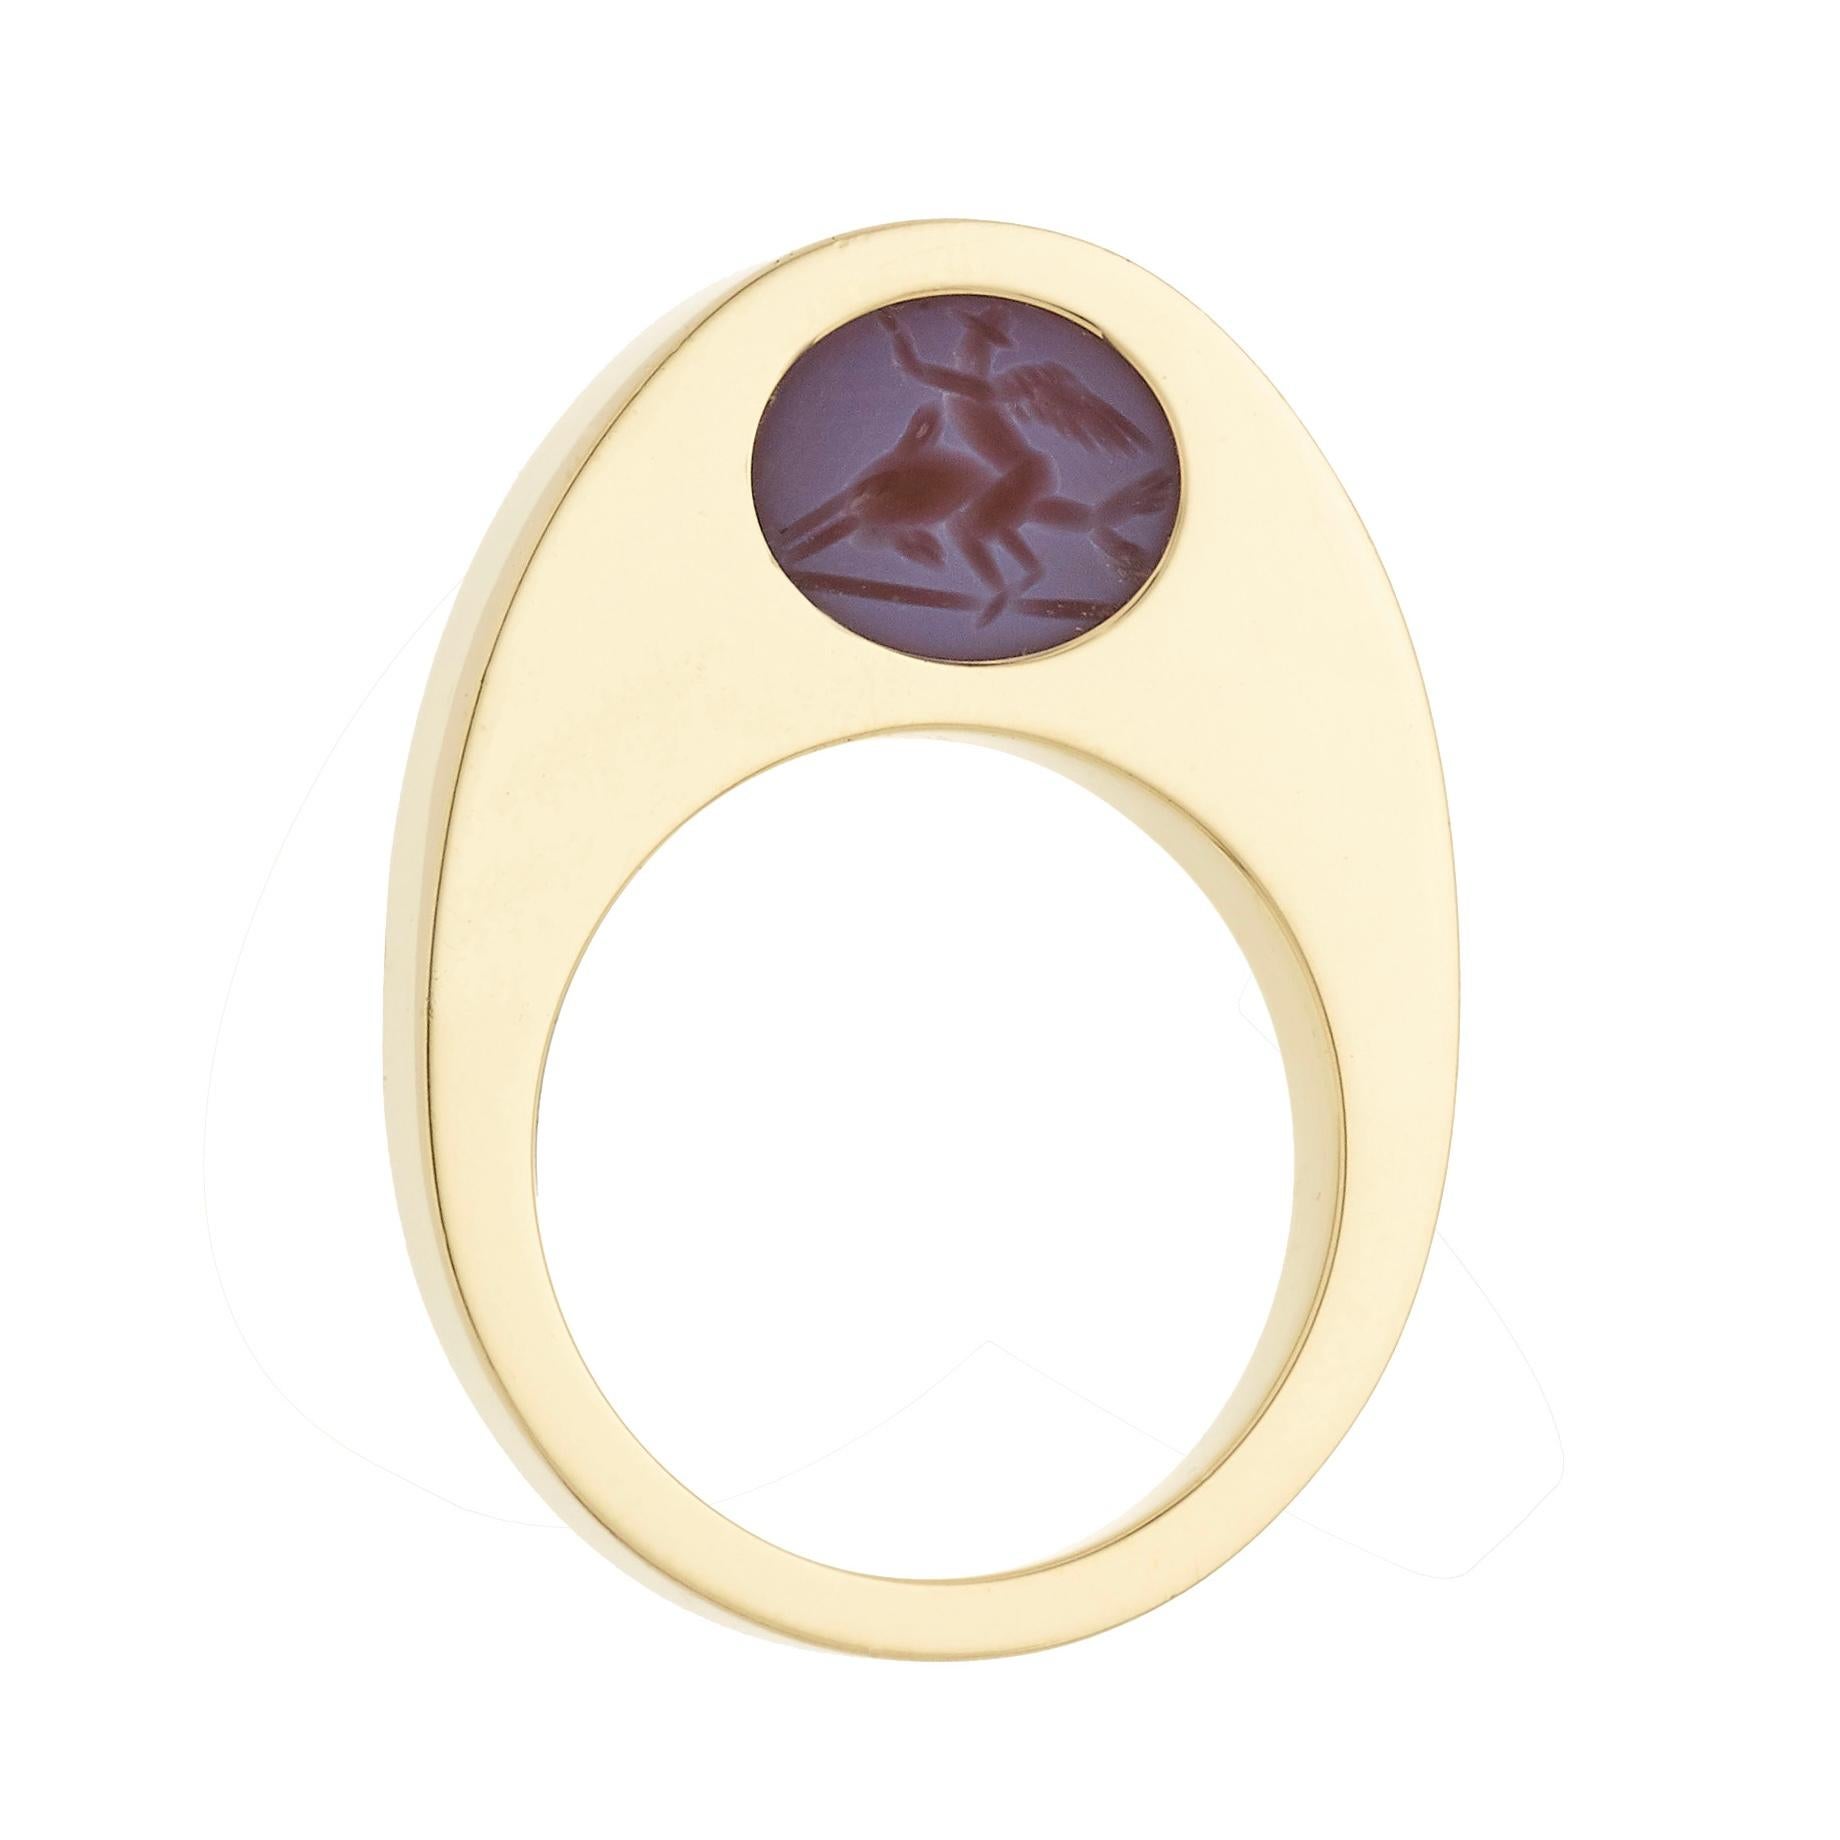 Victoria Strigini (b. 1991) 

An elegant contemporary 18k yellow gold ring, featuring a 2nd- 3rd century AD Roman intaglio in agate, set in the designer's signature Oeuf au Plat mount: a strikingly pure, egg-shaped frame with a thick, squared bezel.